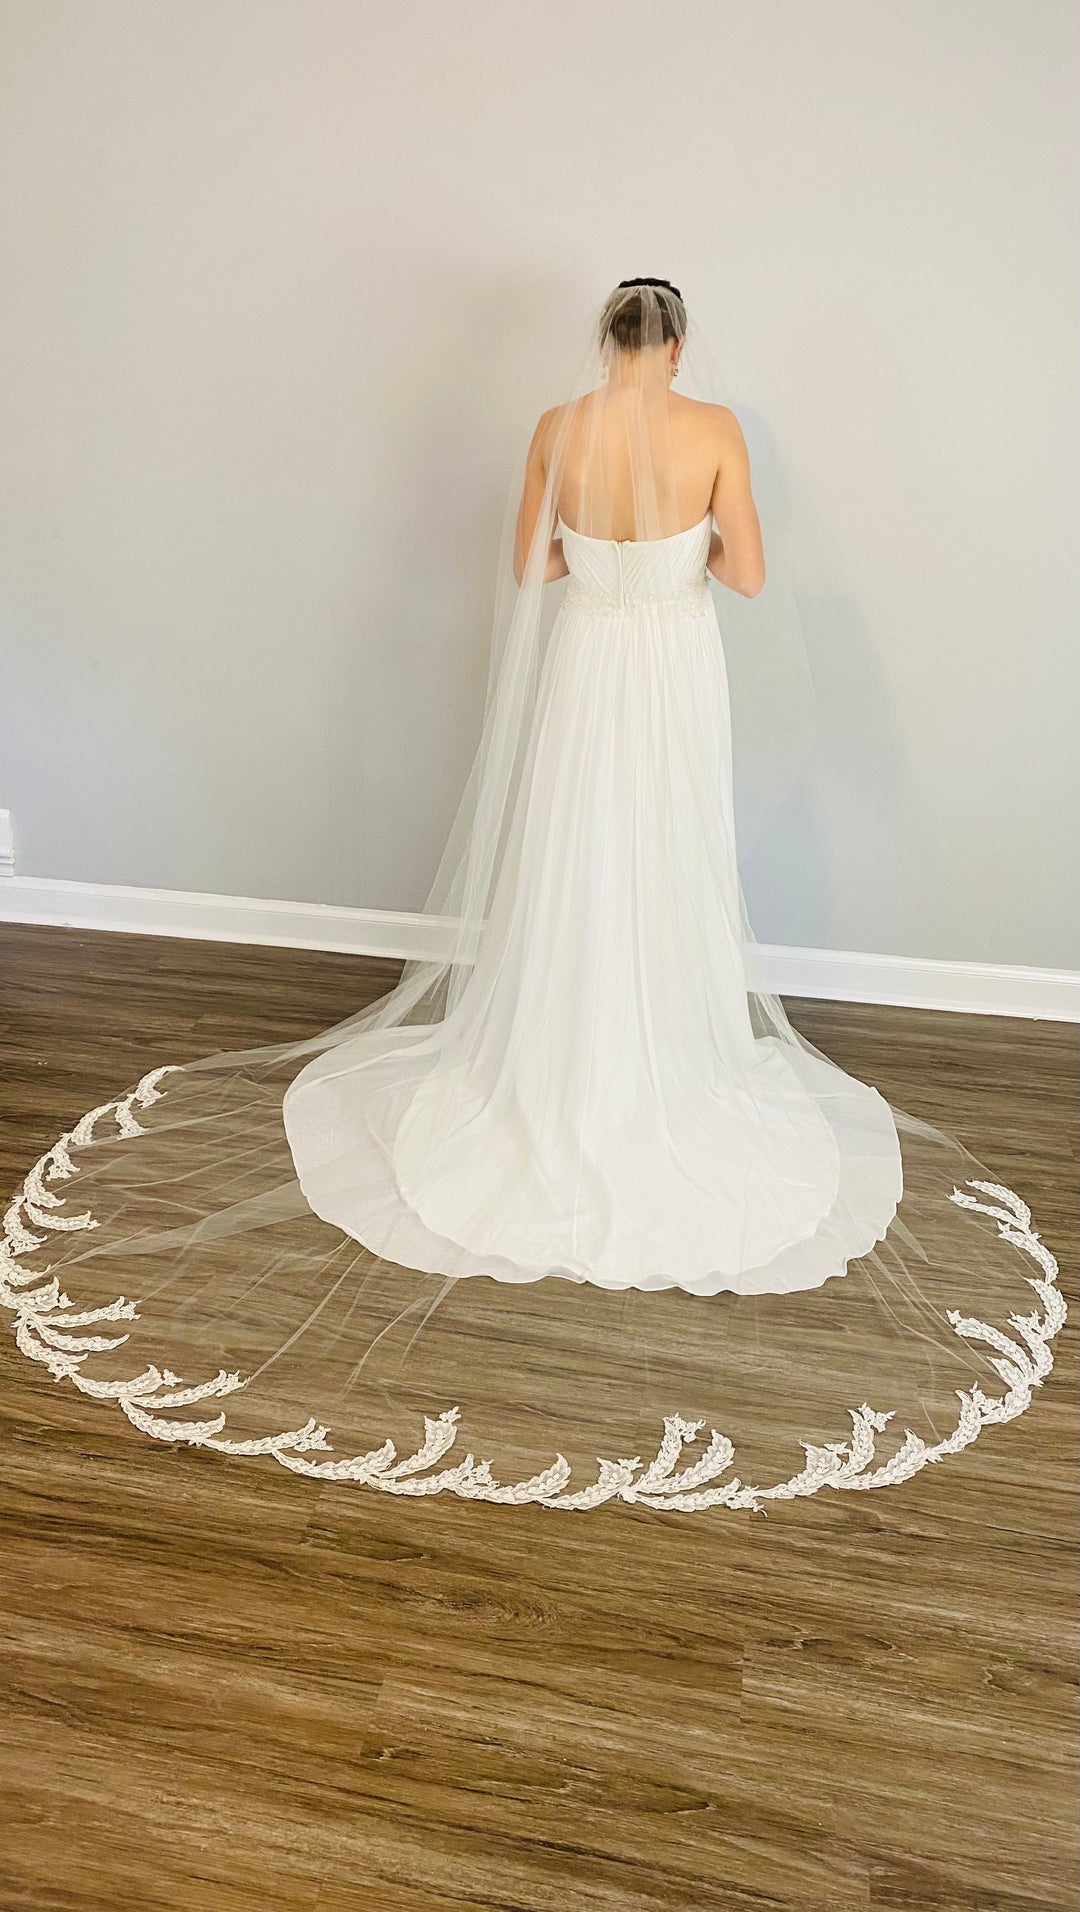 The Fig Veil by Veil Trends